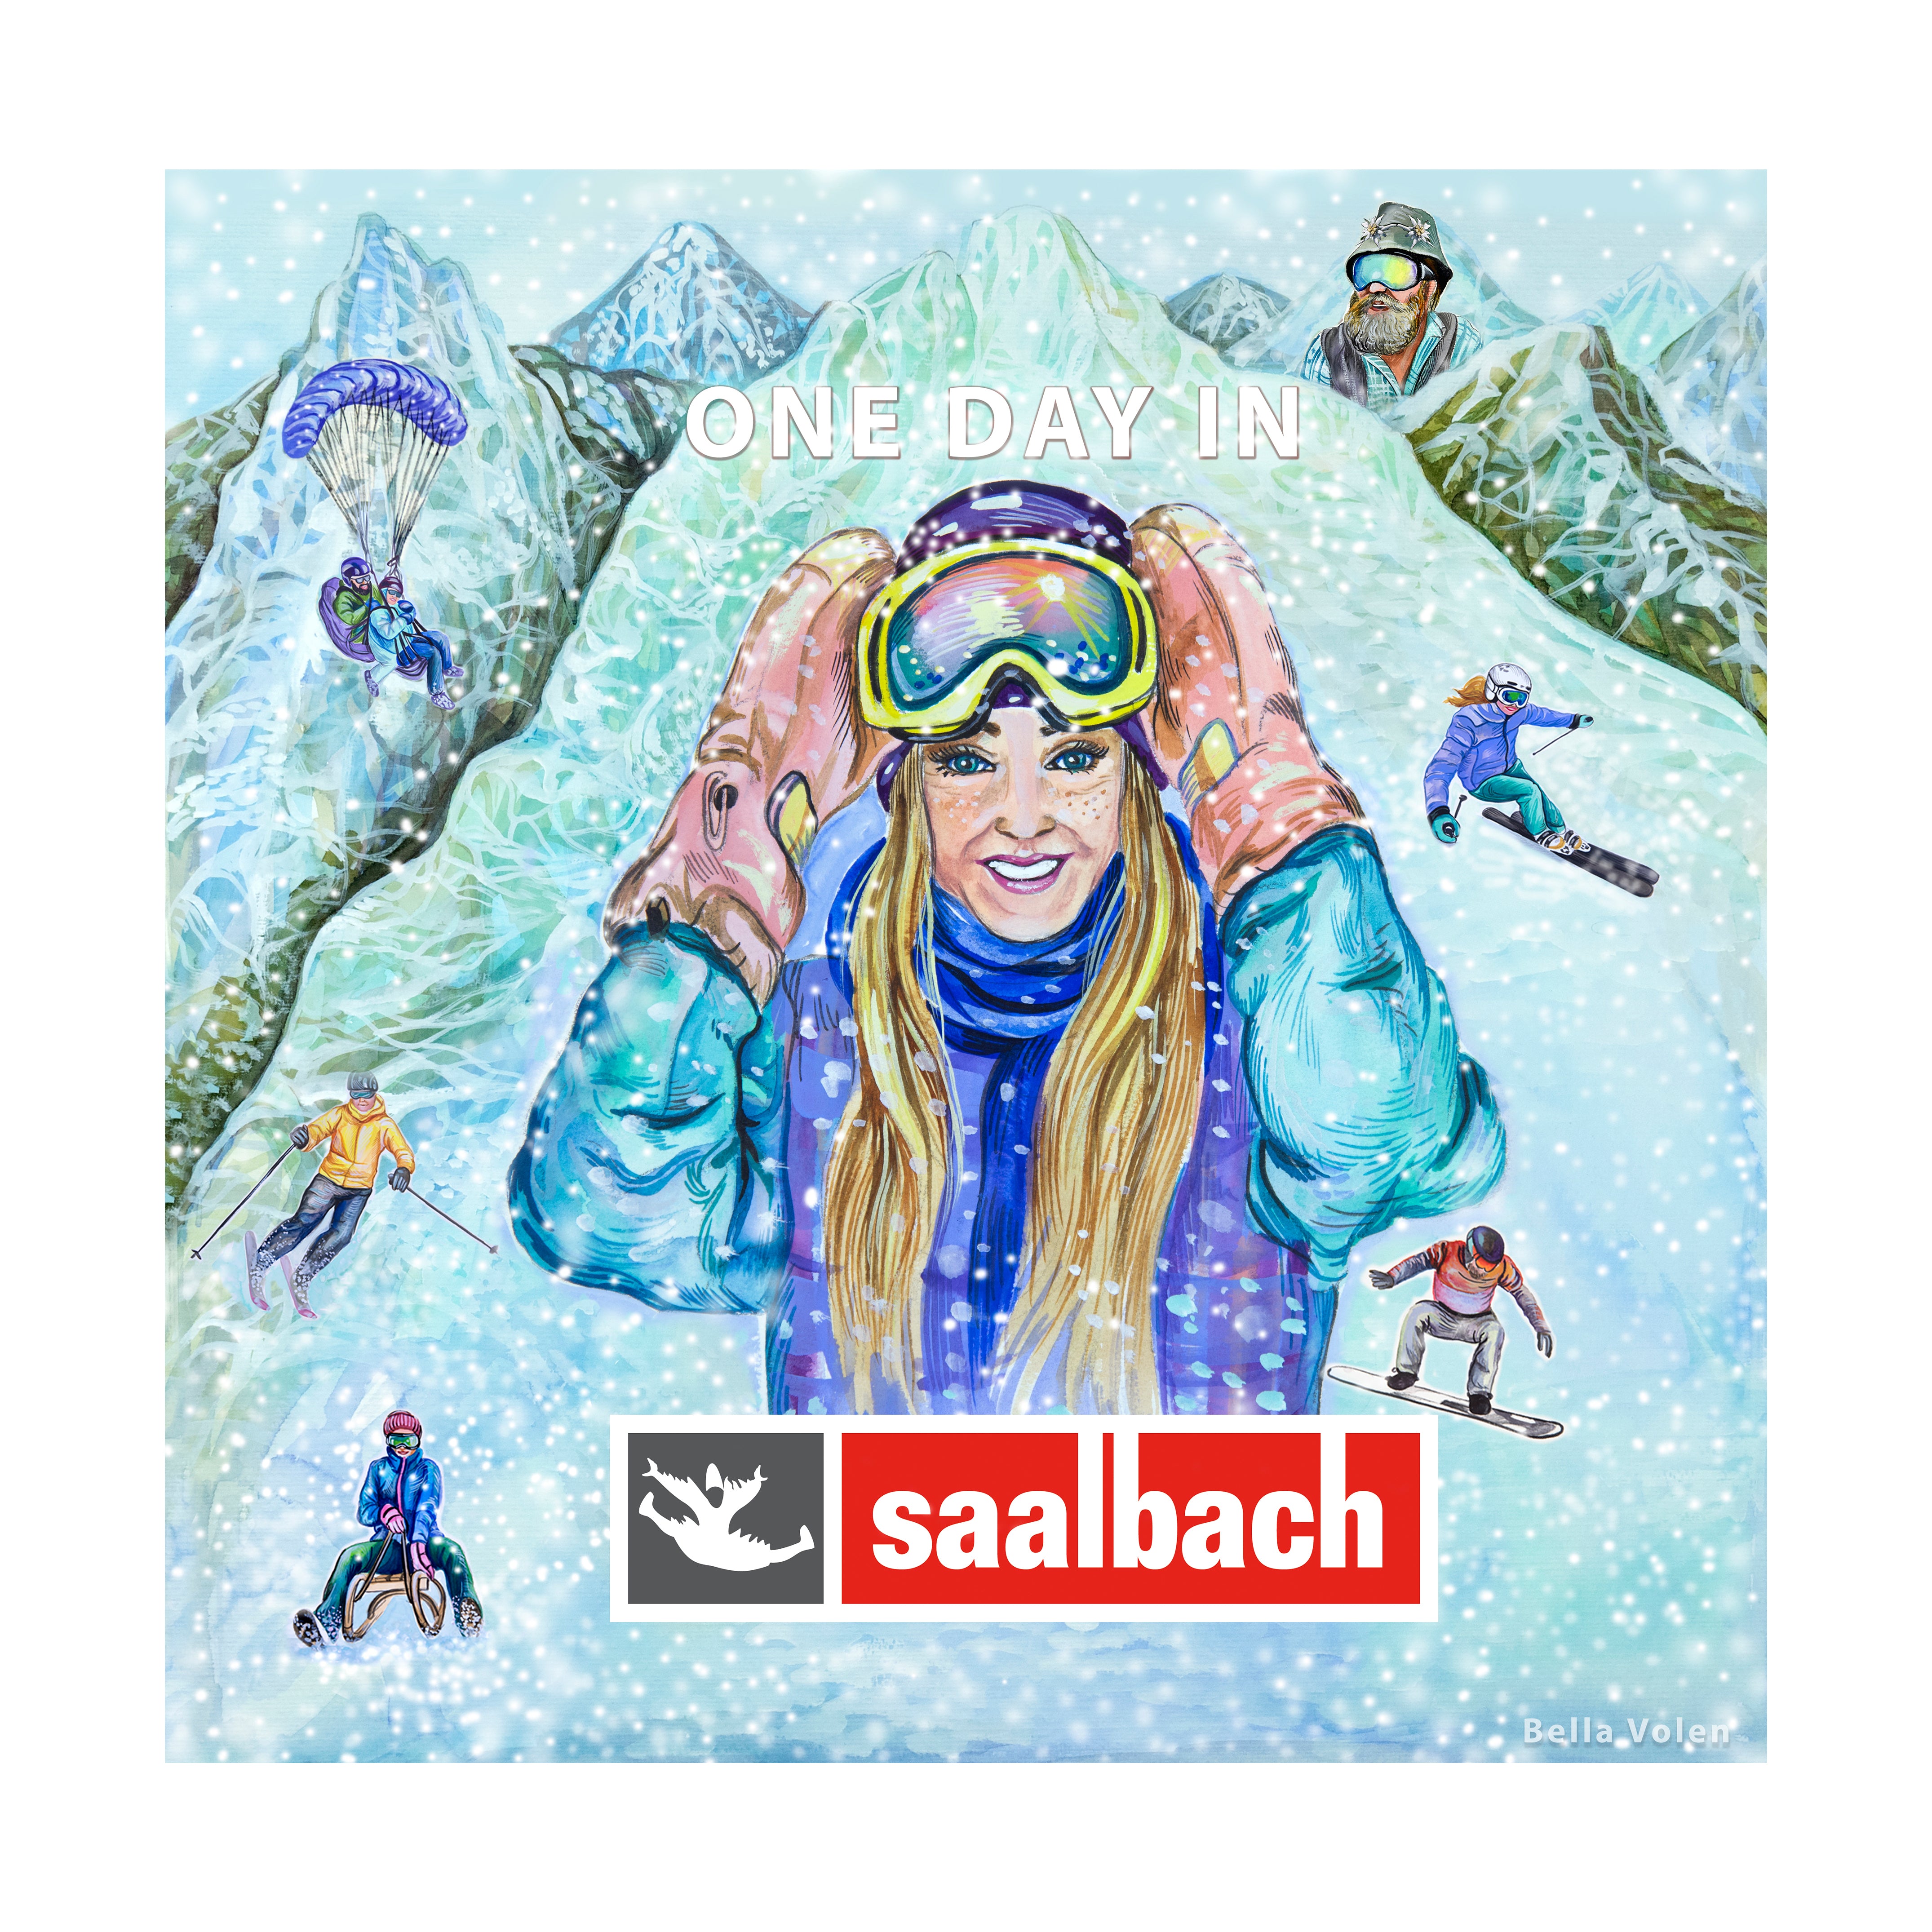 One day in Saalbach